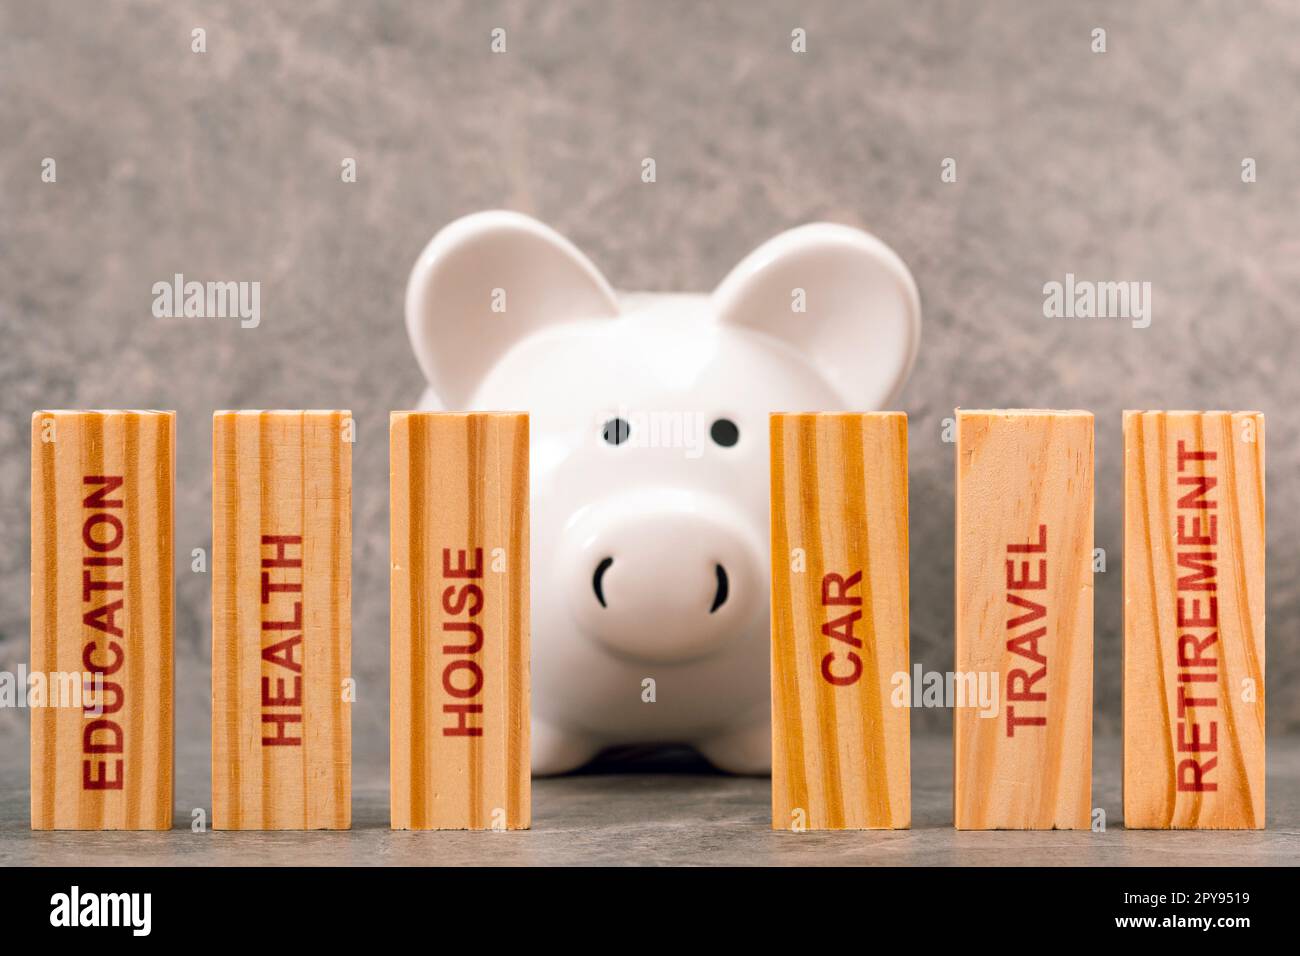 Money saving concept and savings allocation for different purposes Stock Photo